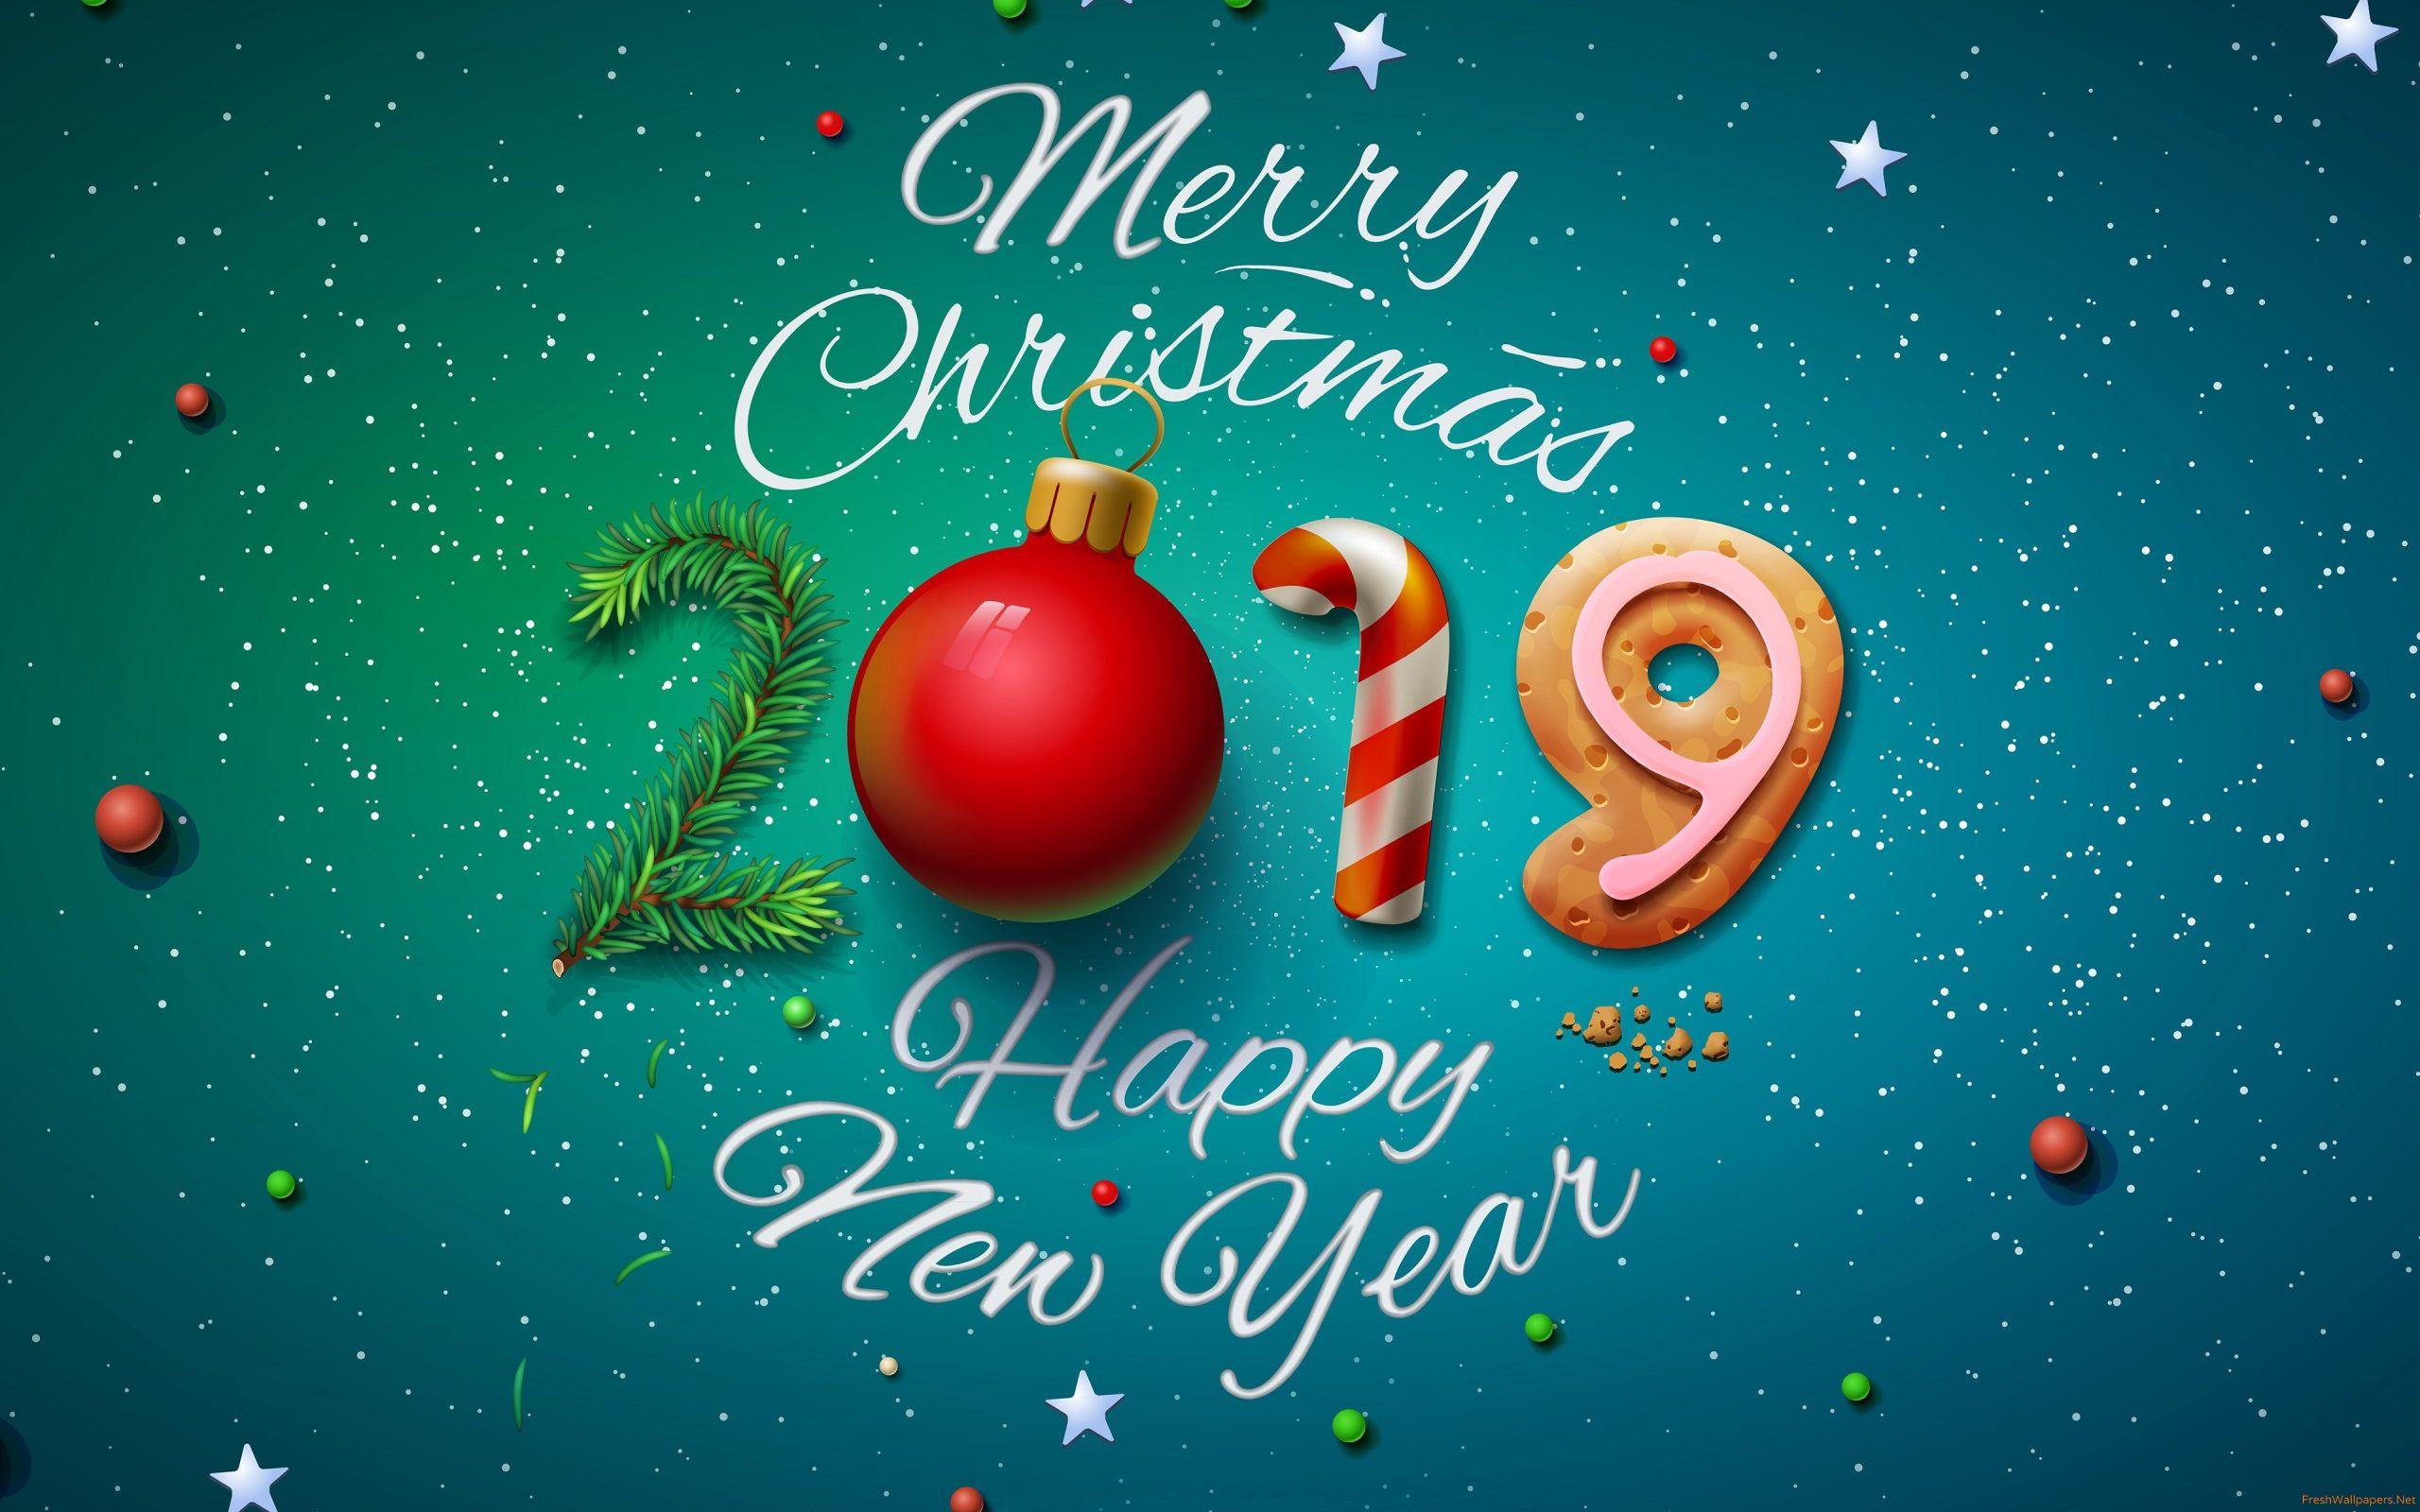 Merry Christmas 2019 Wishes